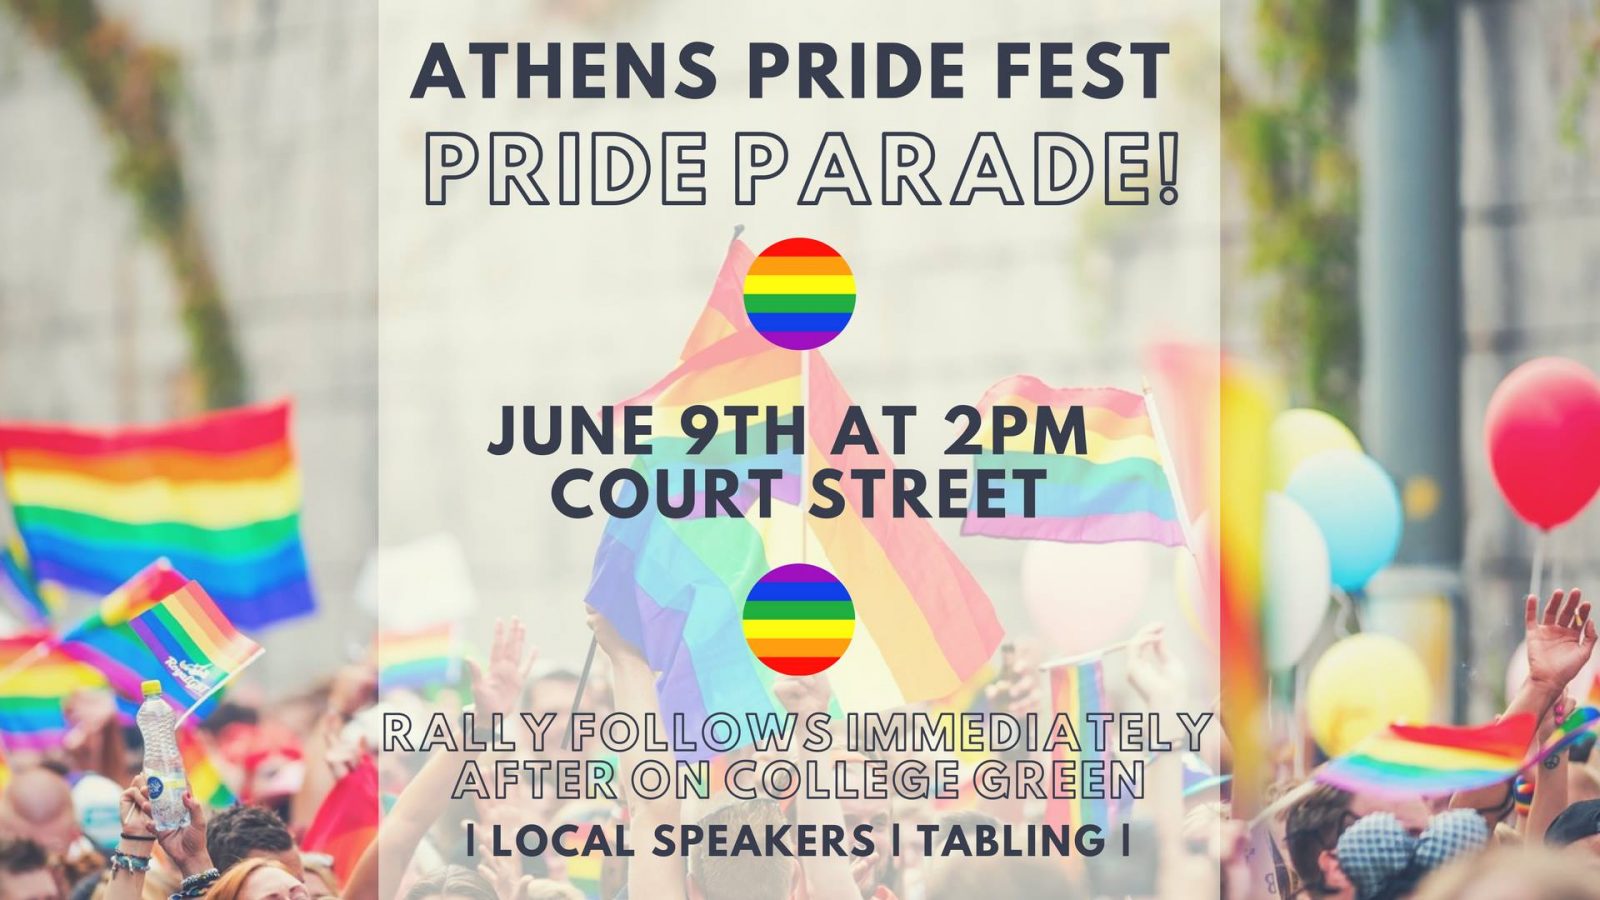 Athens Pride Fest Parade and Rally WOUB Public Media